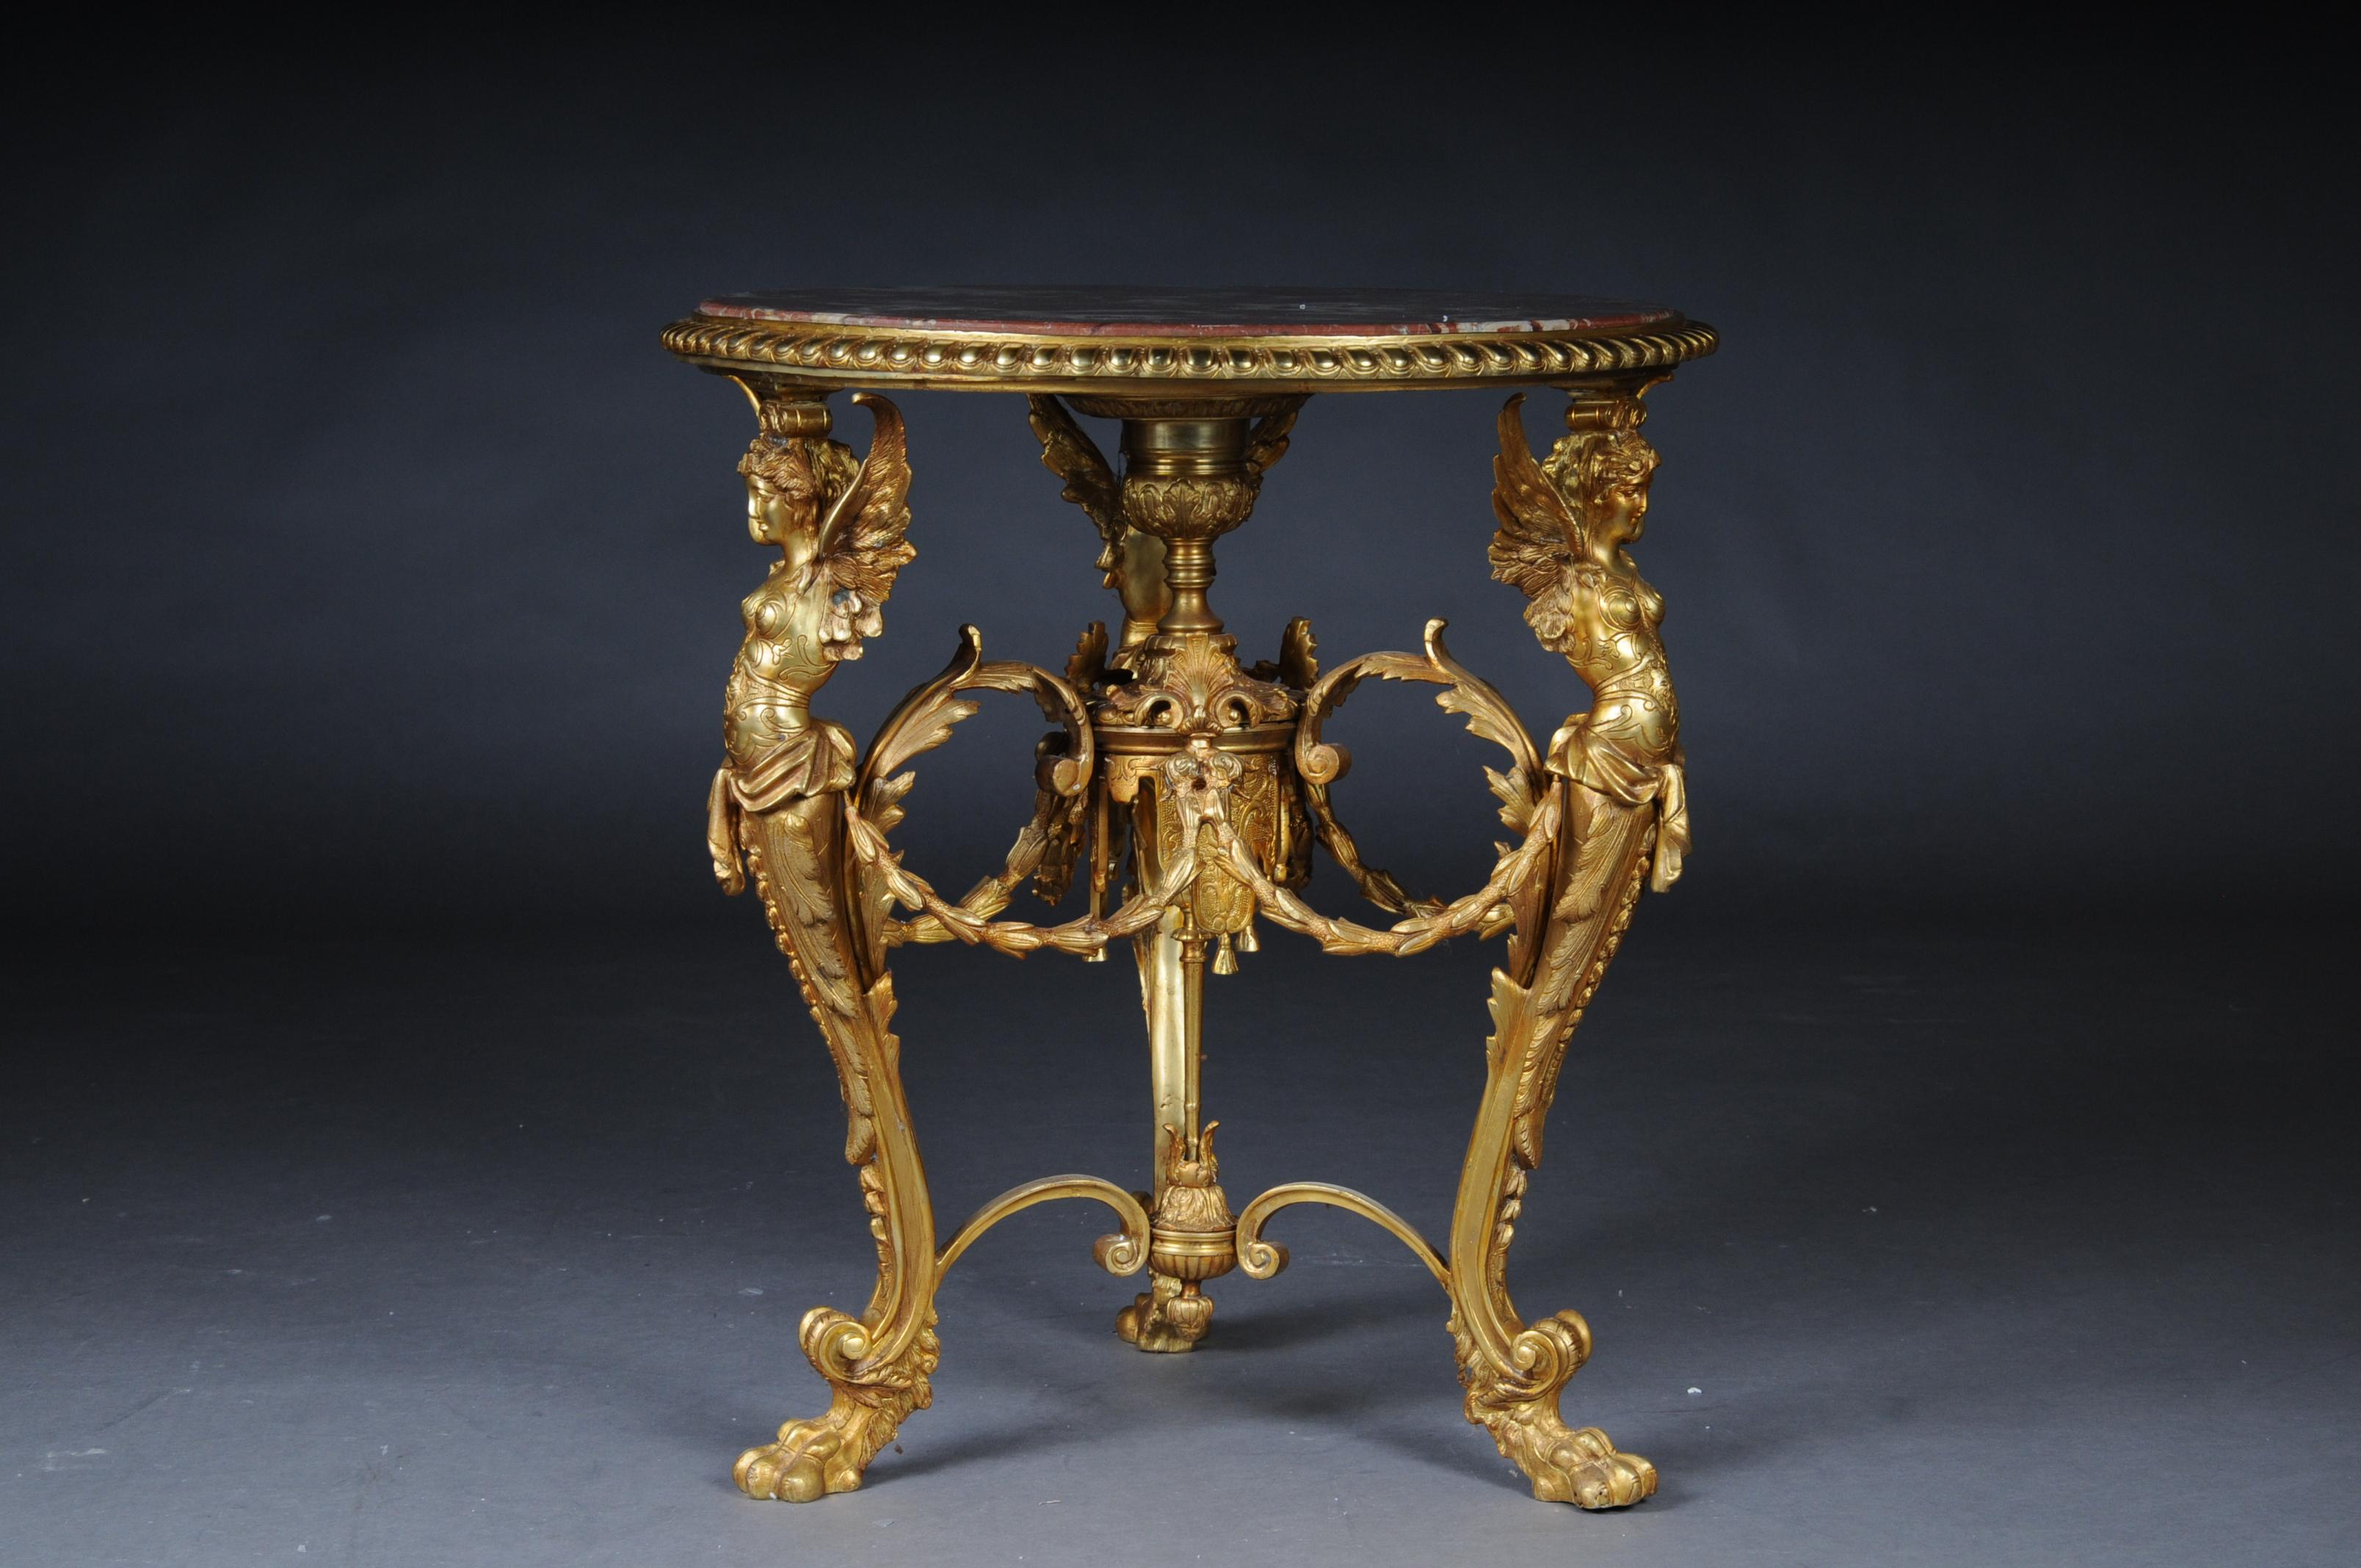 Finely chased and gilded bronze in wax casting. Three curly legs connected with gutter. Medium with garland-shaped decoration. The legs are in the form of three winged, fully plastic female bodies, ending in paw feet. Slightly protruding, round